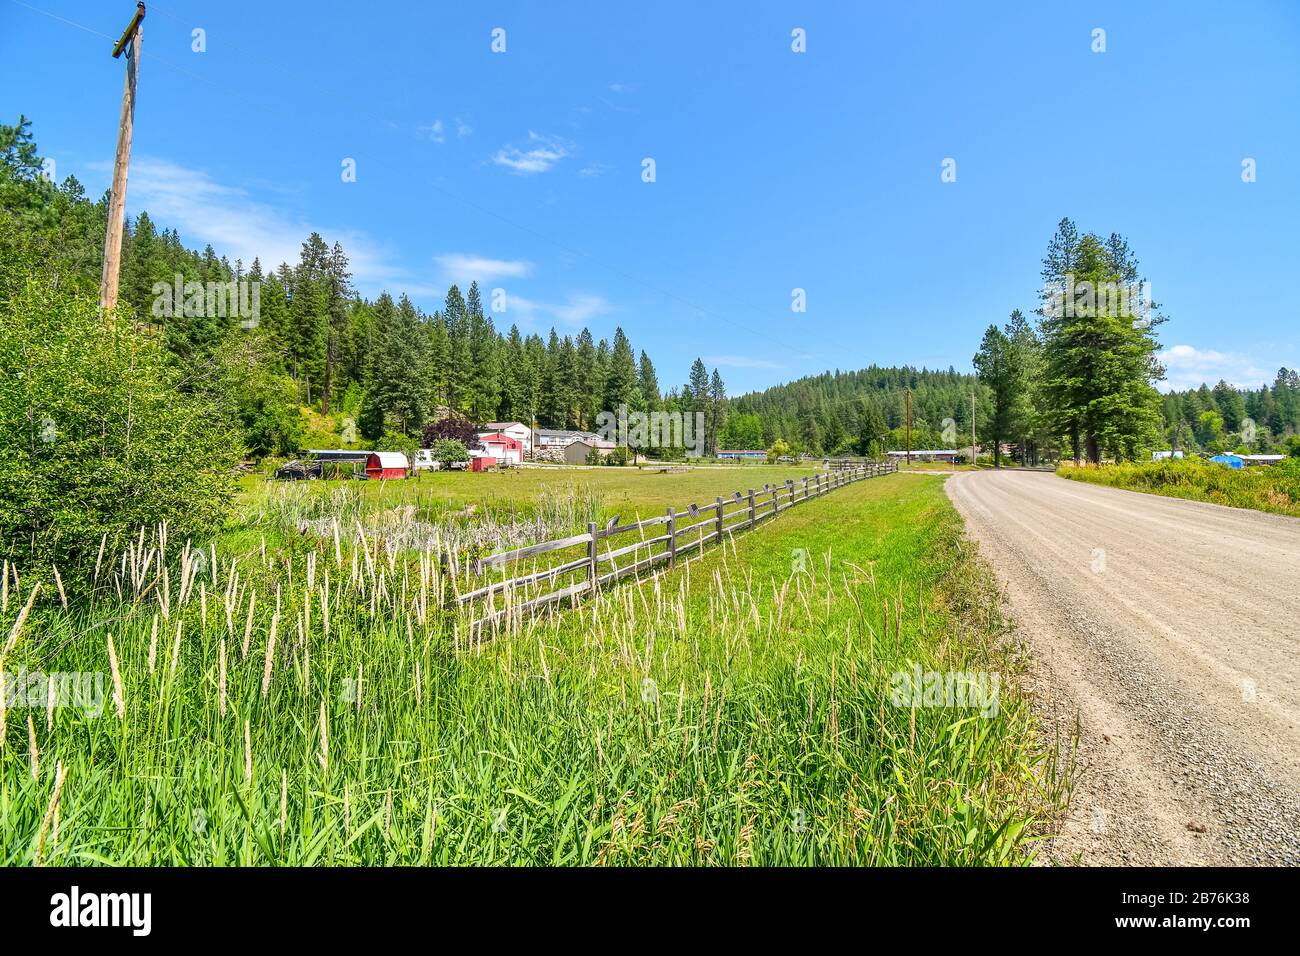 A dirt rural with homes and ranches in the rural Coeur d'Alene area of North Idaho, USA Stock Photo